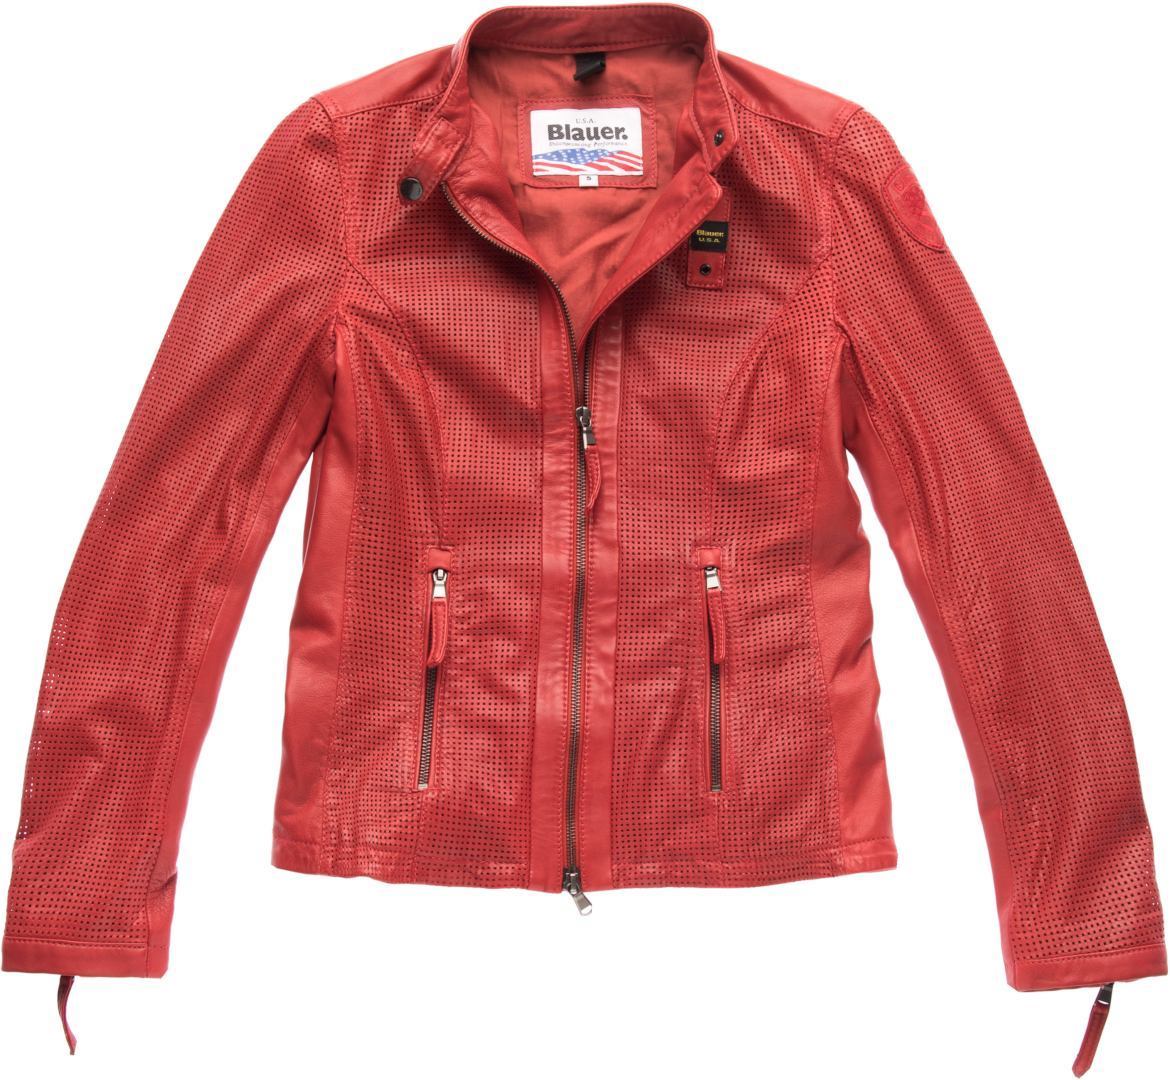 Image of Blauer USA Miller Giacca in pelle perforata Ladies, rosso, dimensione XL per donne